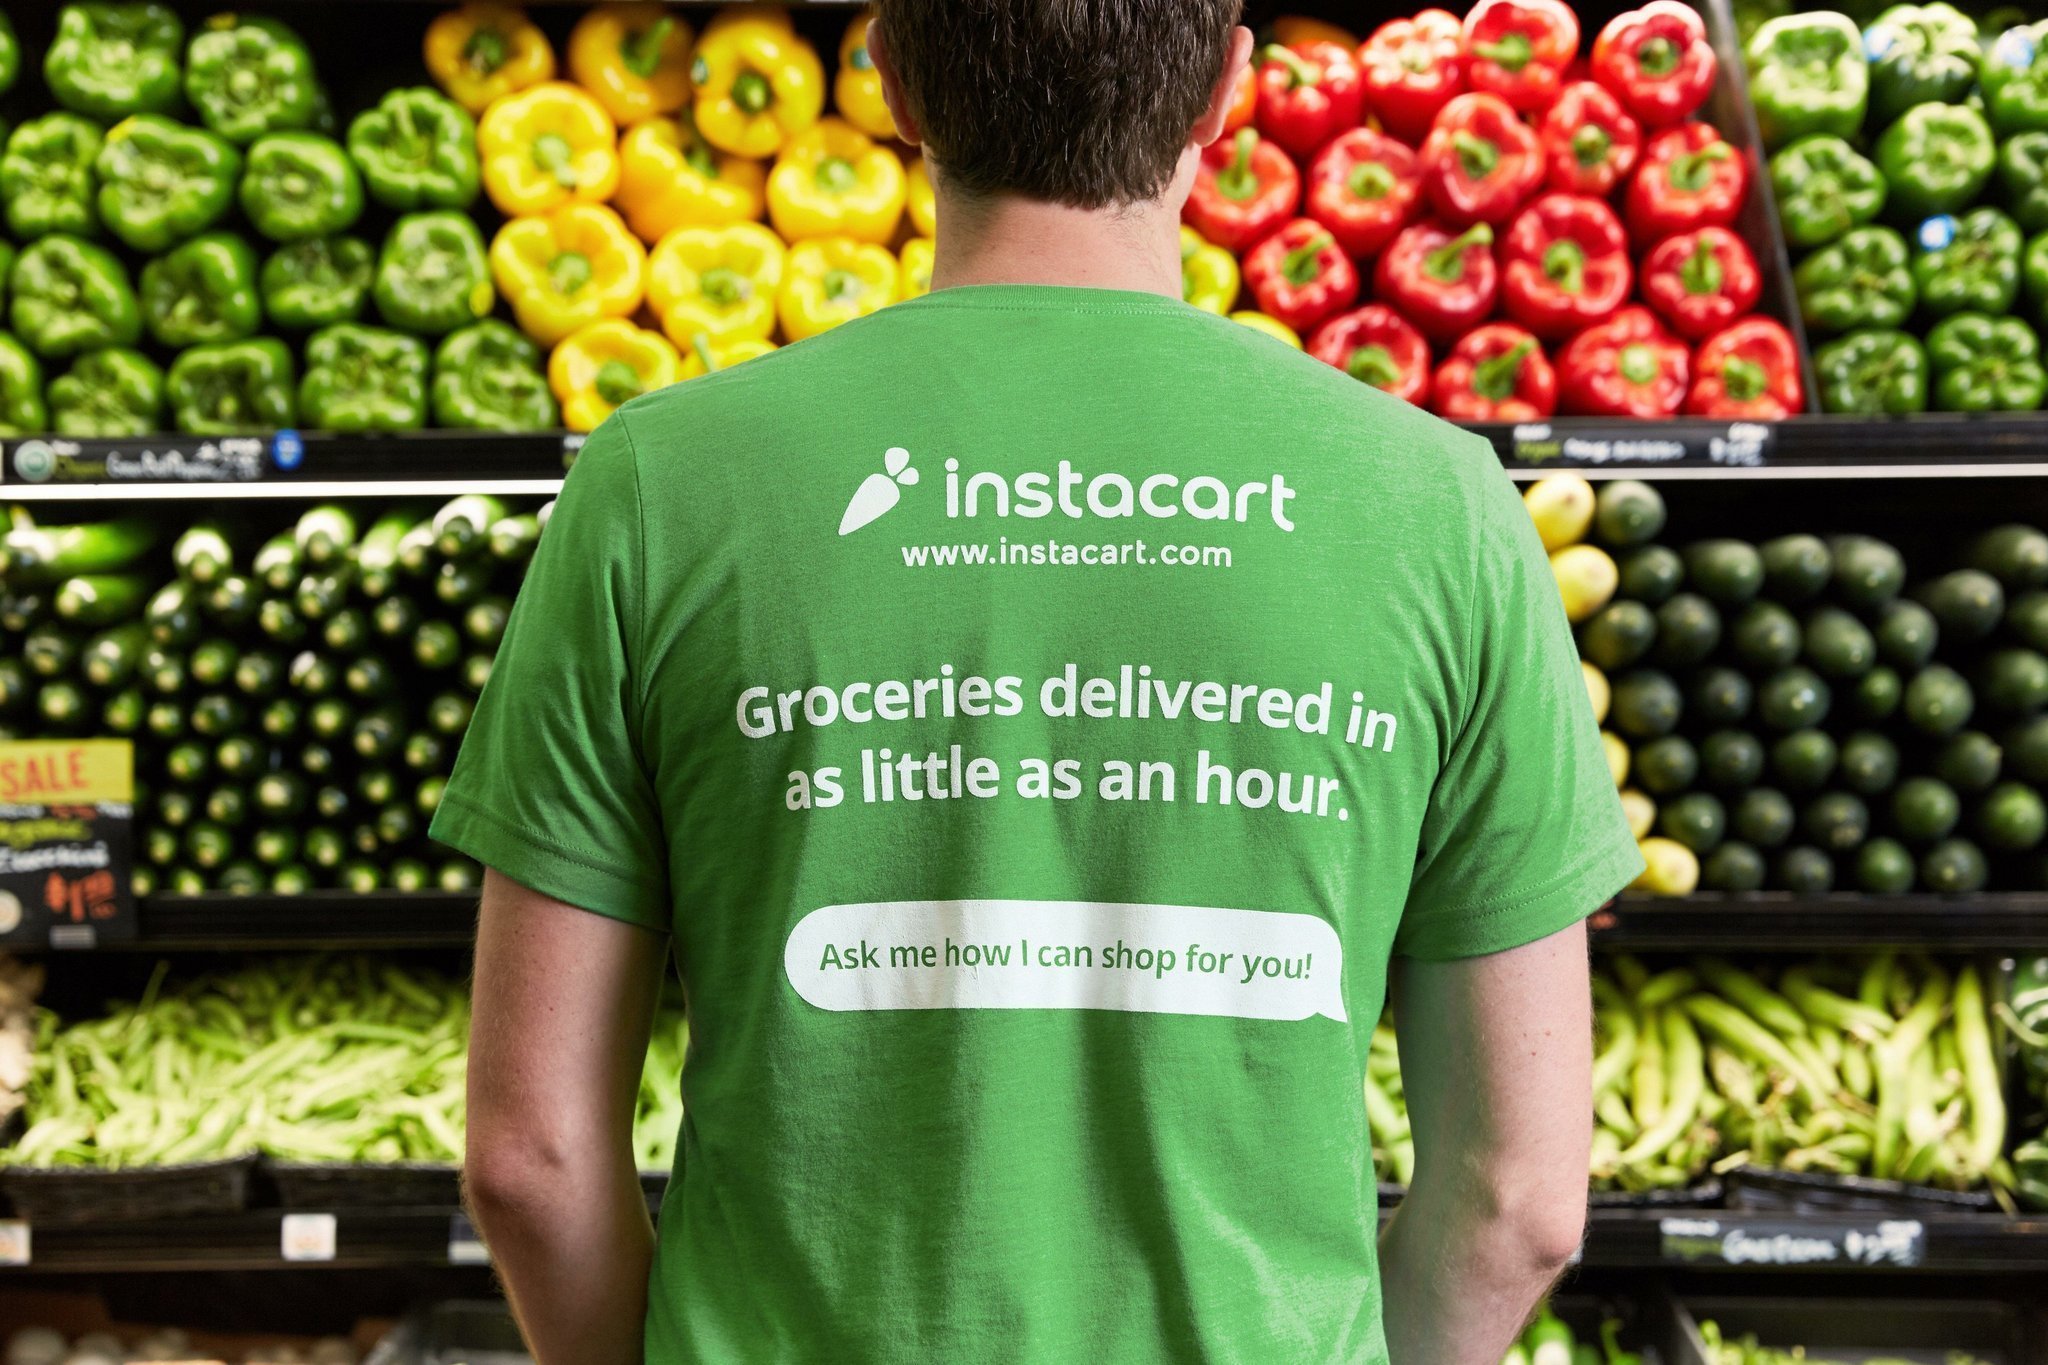 how to contact instacart shopper after delivery